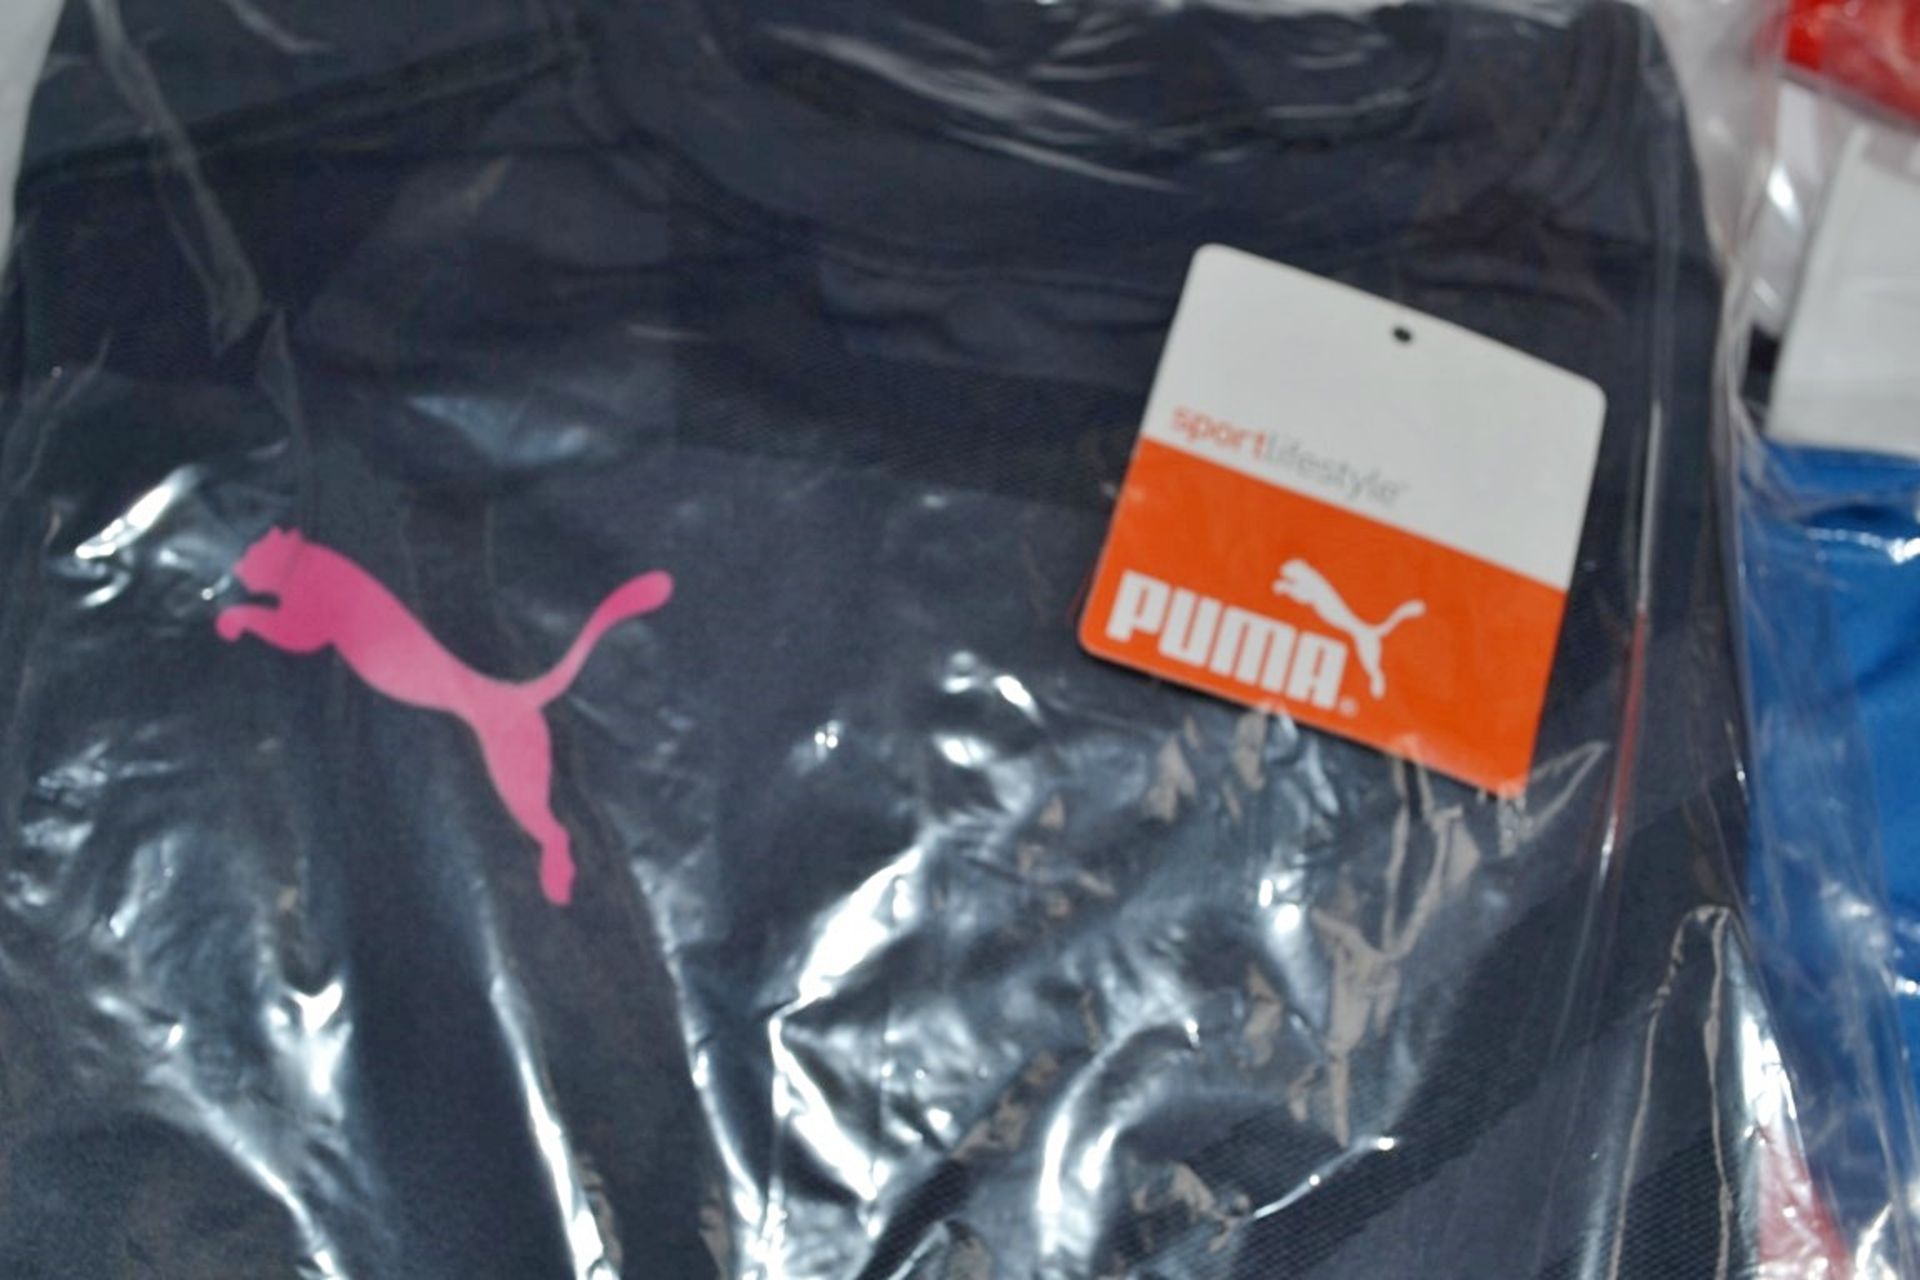 10 x Assorted PUMA Branded T-Shirts & Vests - Size: All Adult Medium - New With Tags - CL155 - - Image 5 of 5